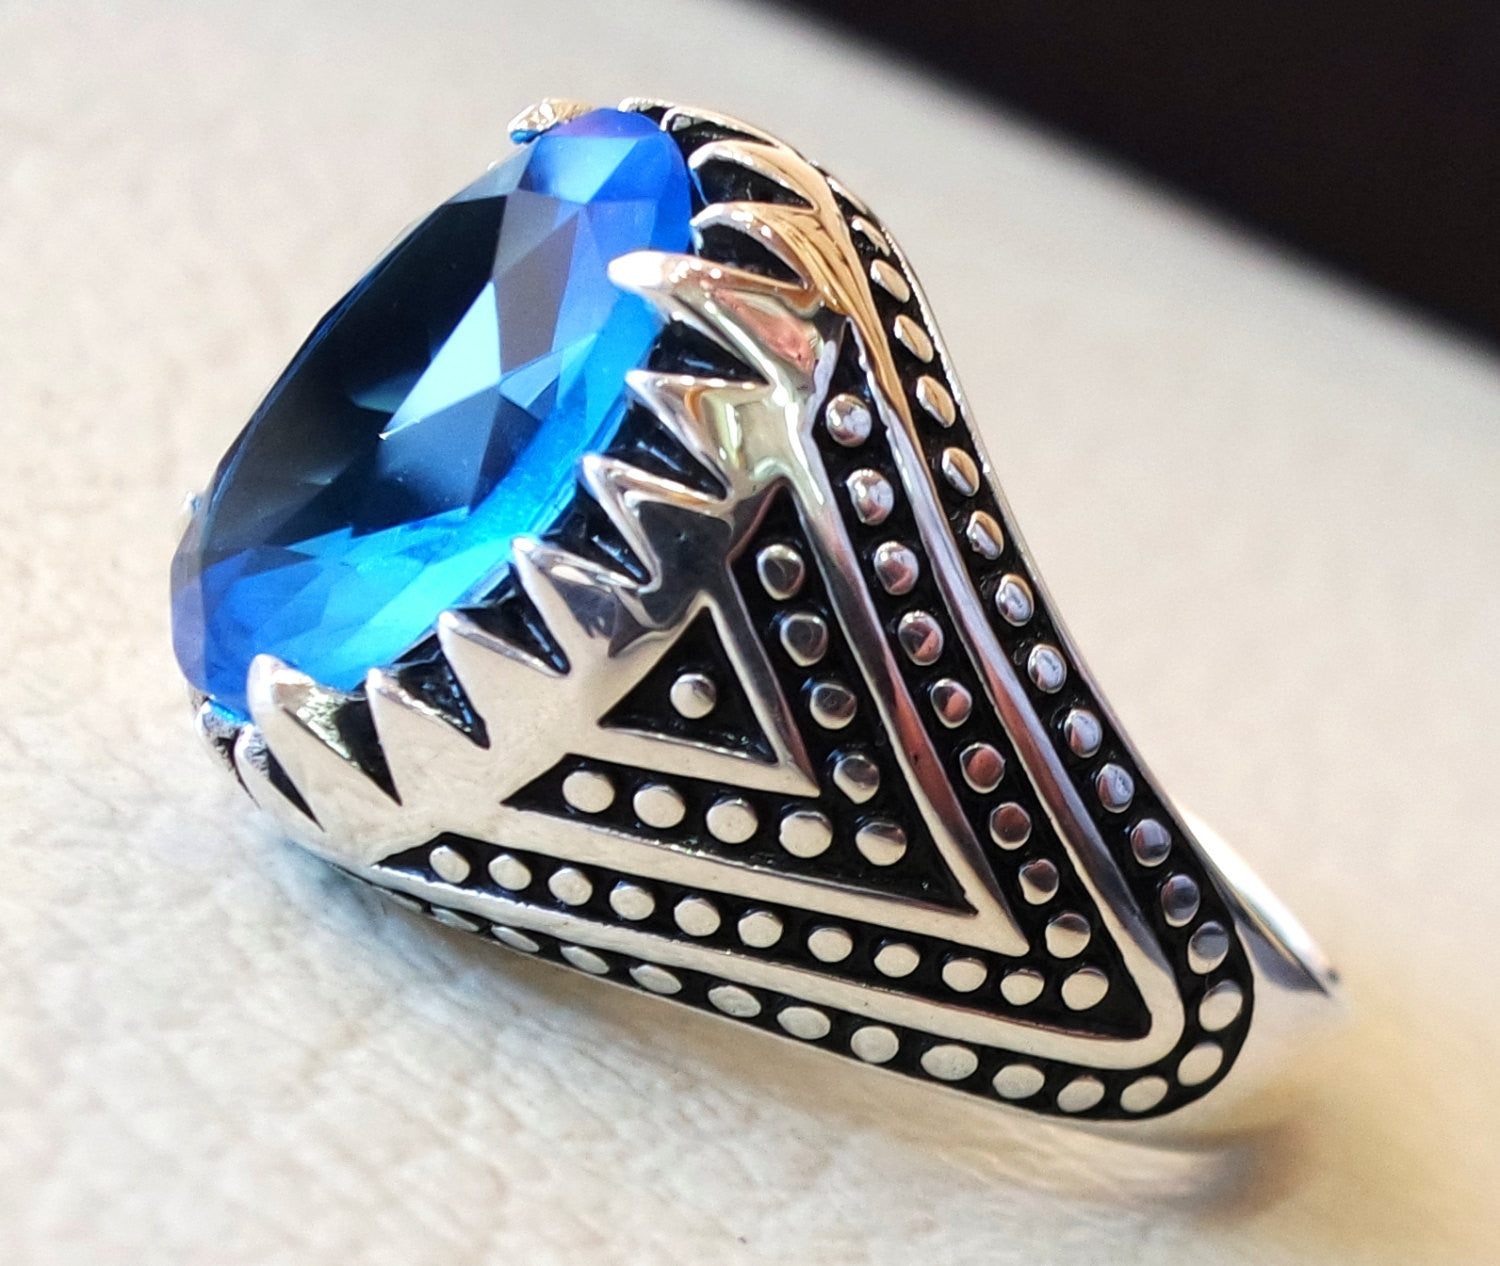 sky blue cubic zircon men ring sterling silver 925 sky unique stone all sizes jewelry fast shipping ottoman style